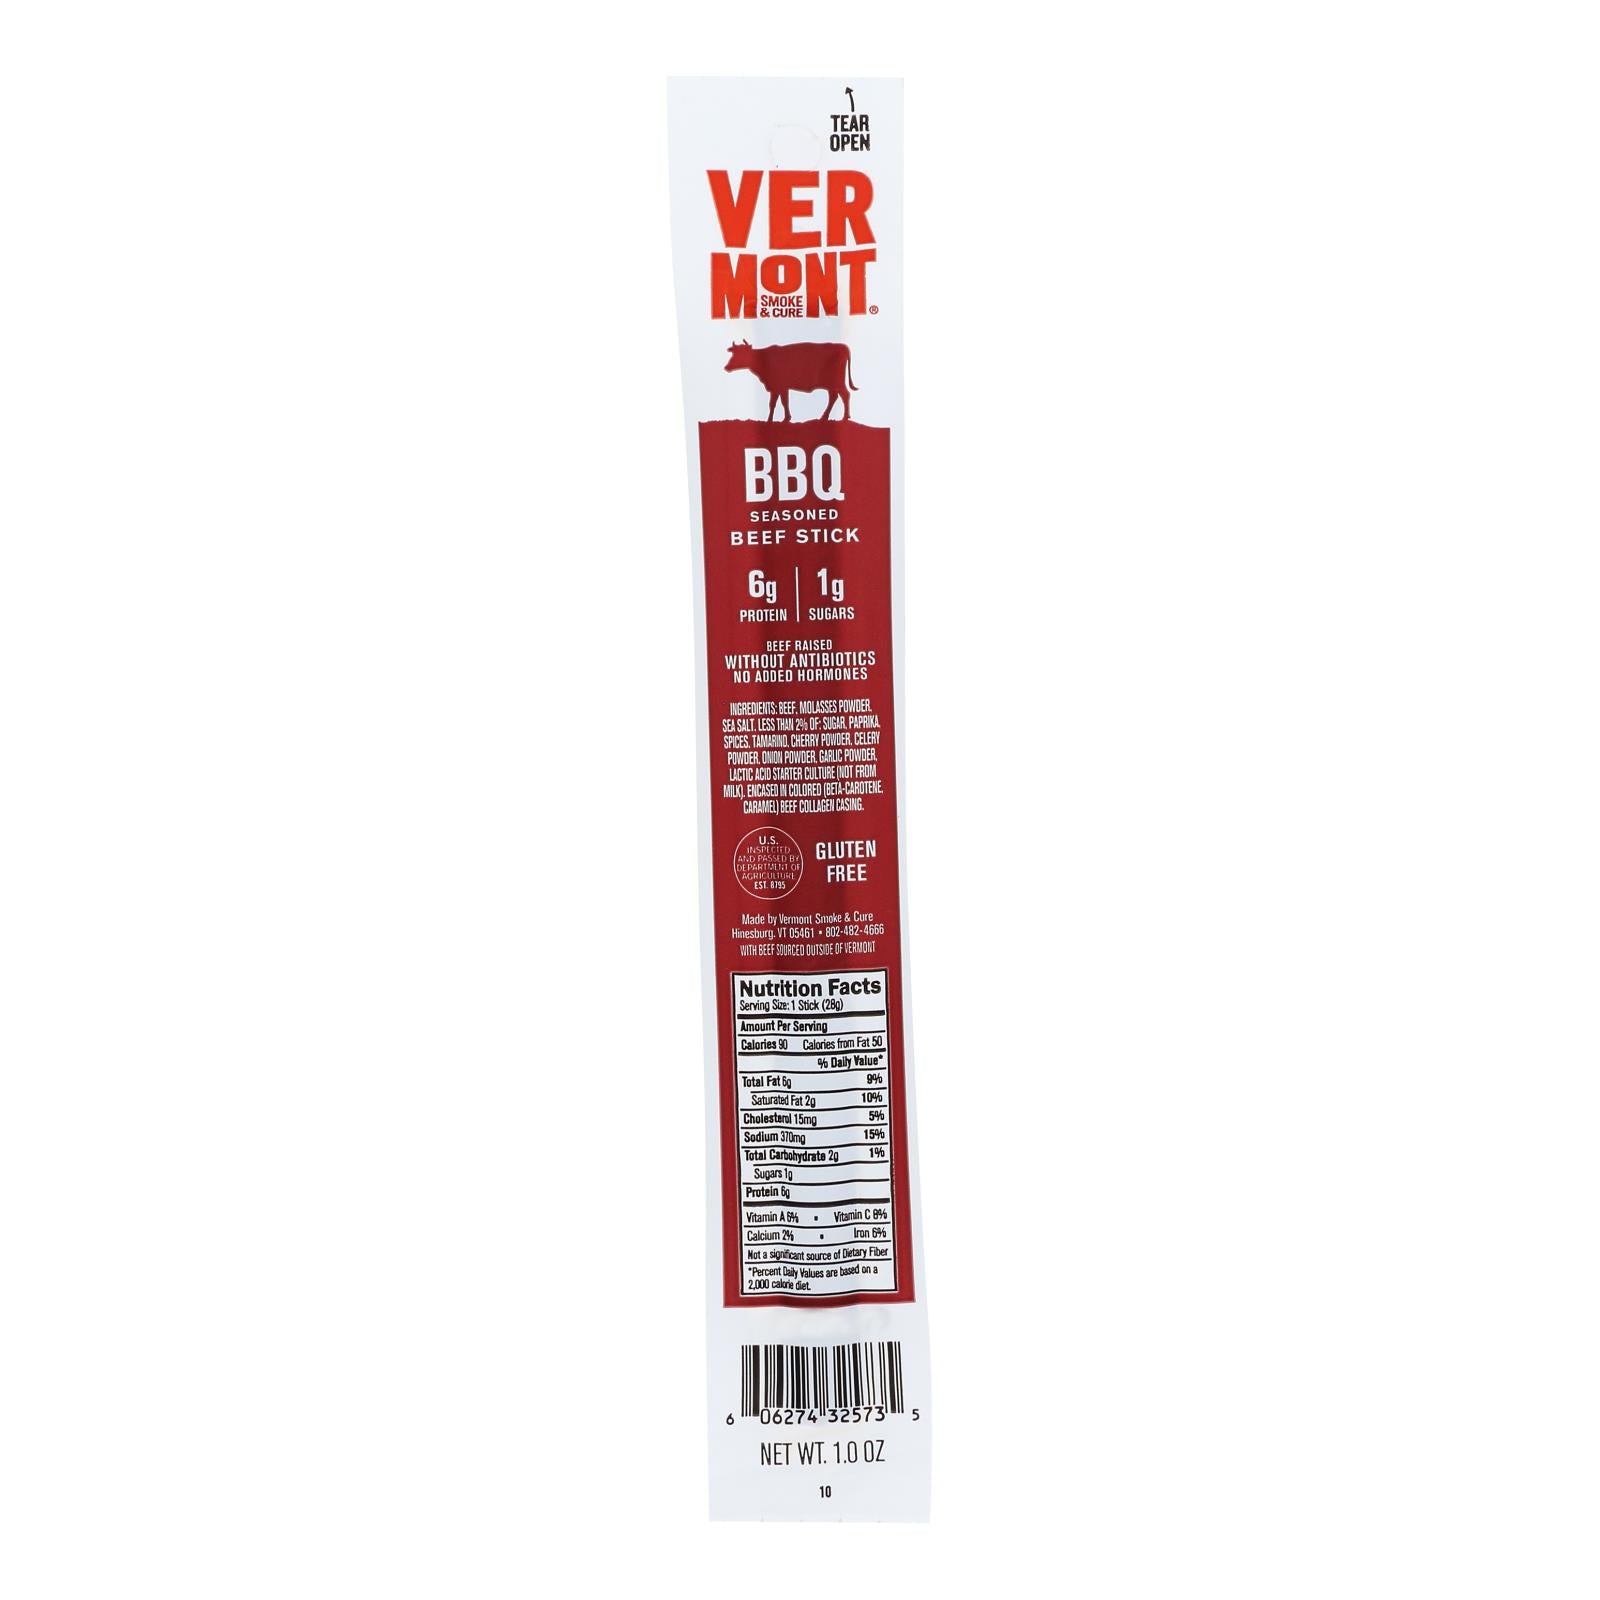 Vermont Smoke And Cure Realsticks - Bbq - 1 Oz - Case Of 24